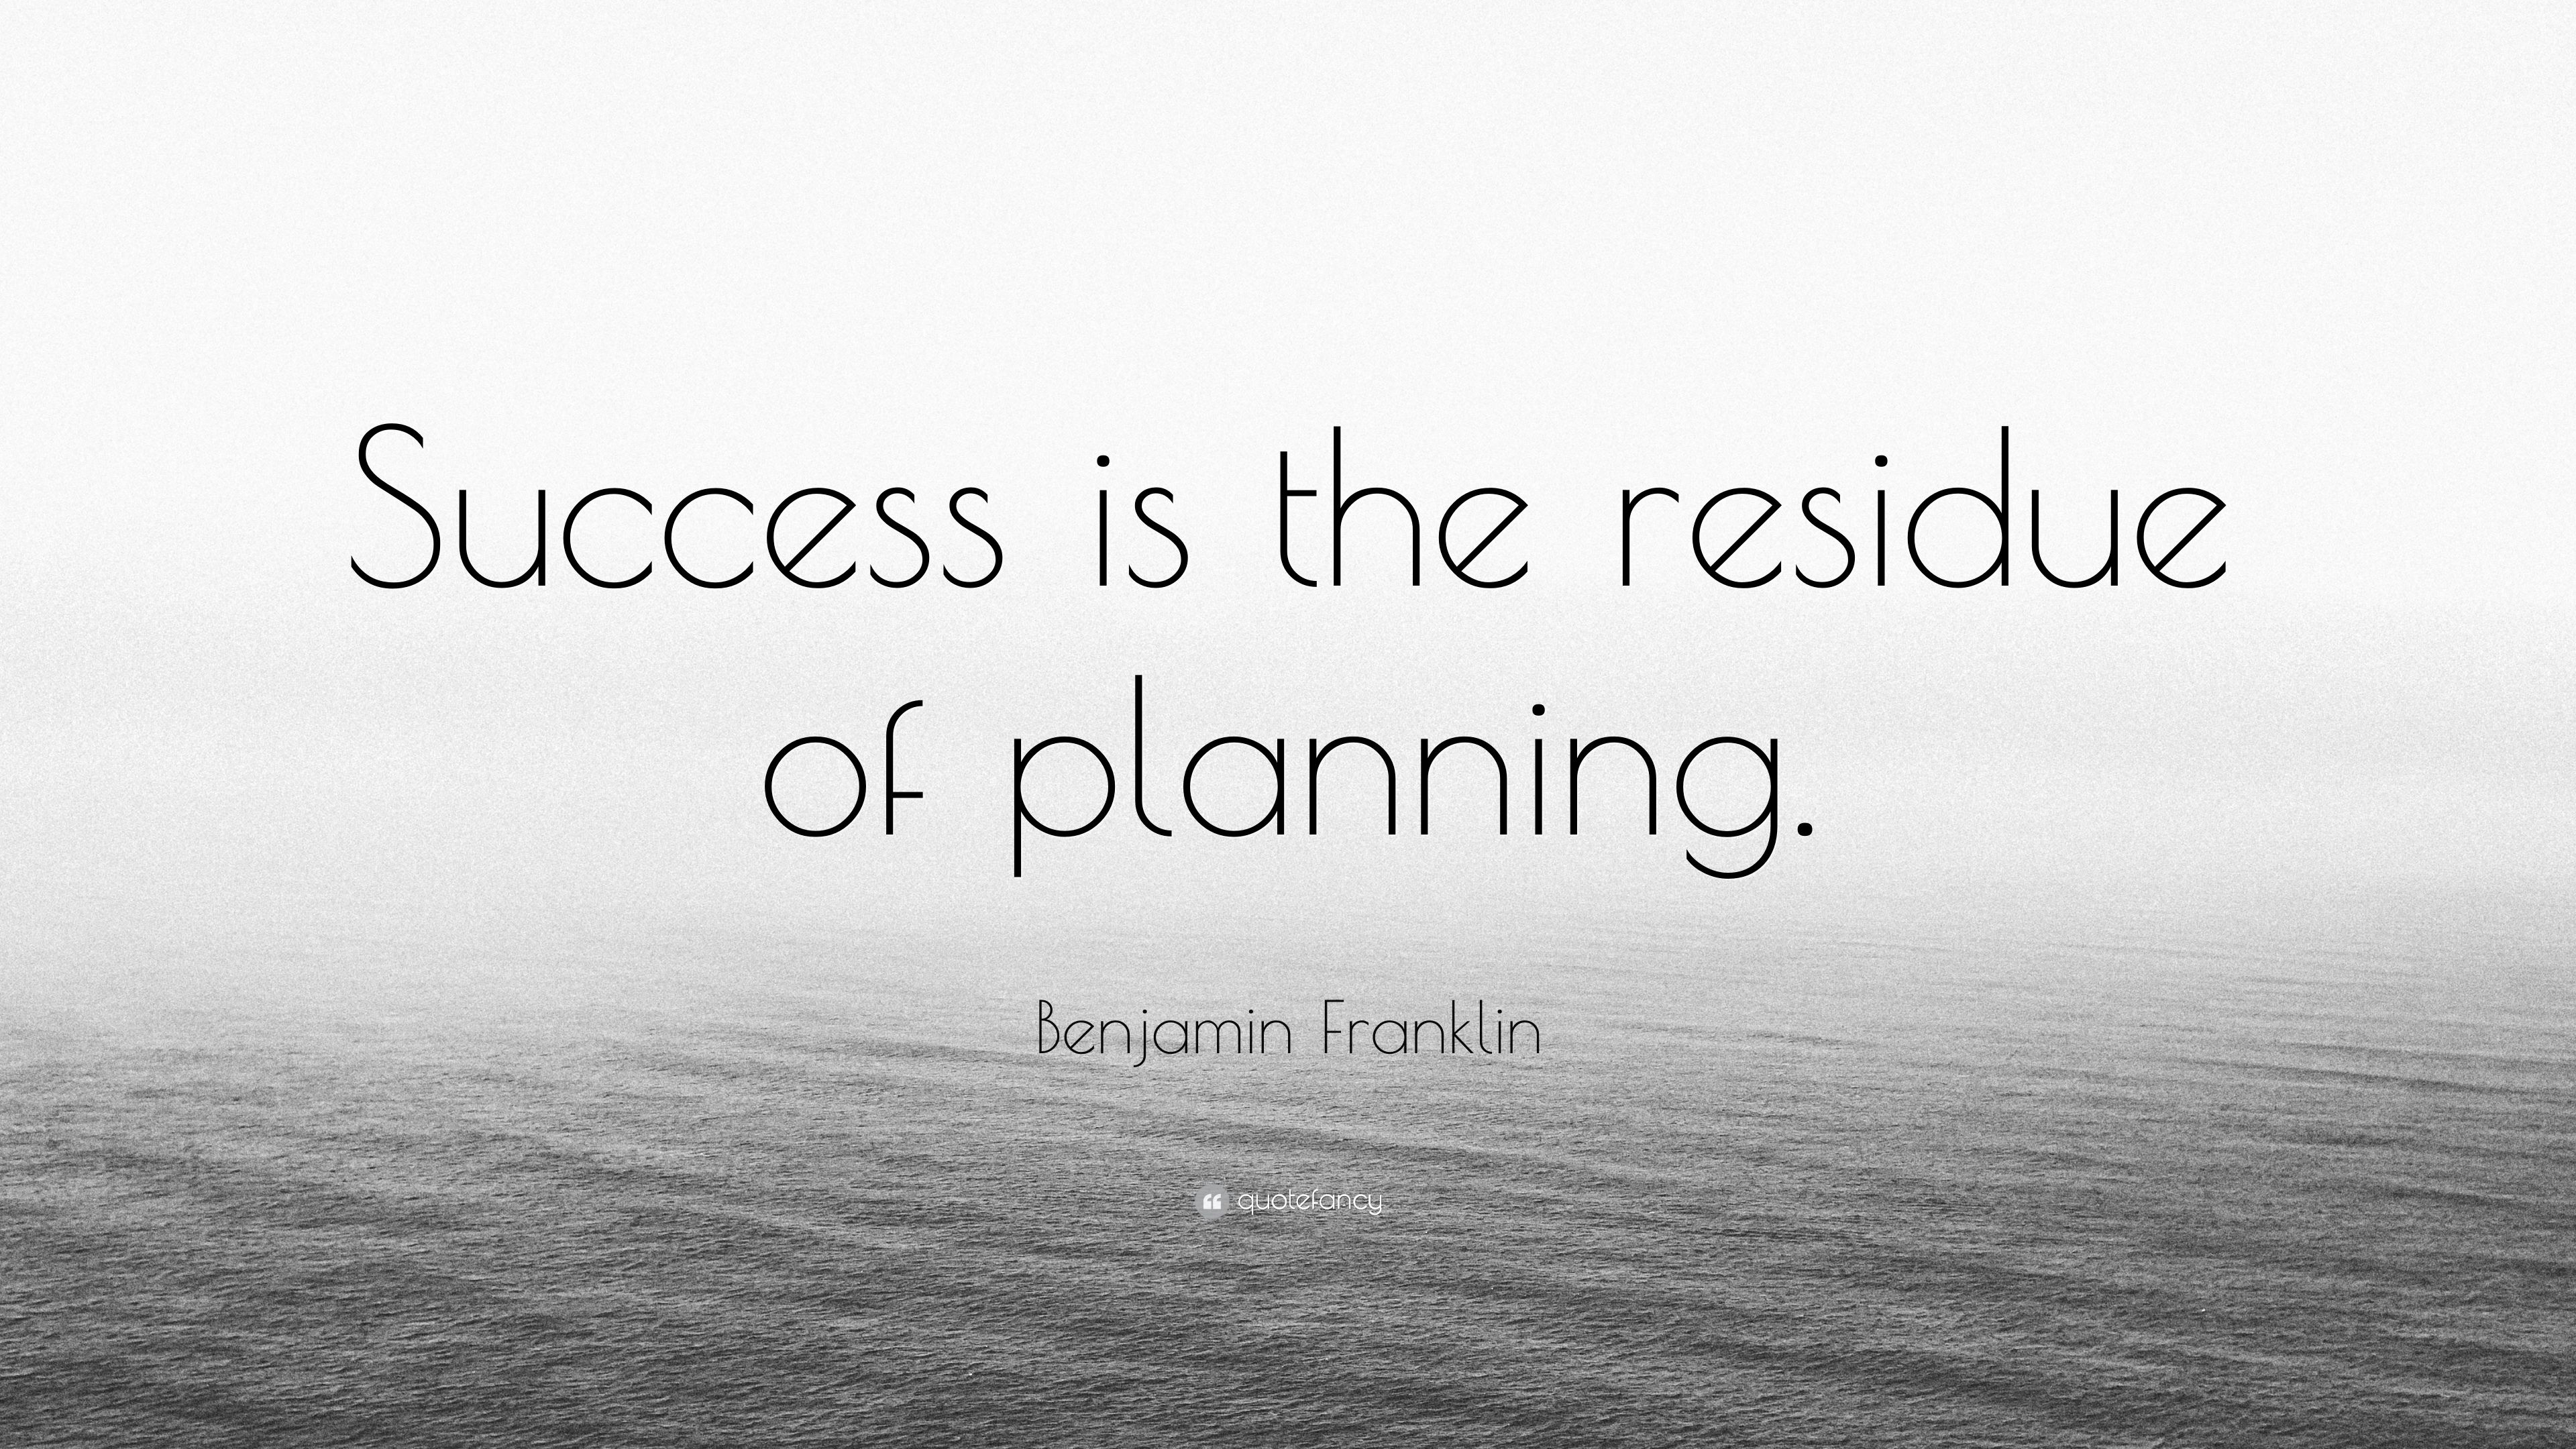 Benjamin Franklin Quote: “Success is the residue of planning.” 7